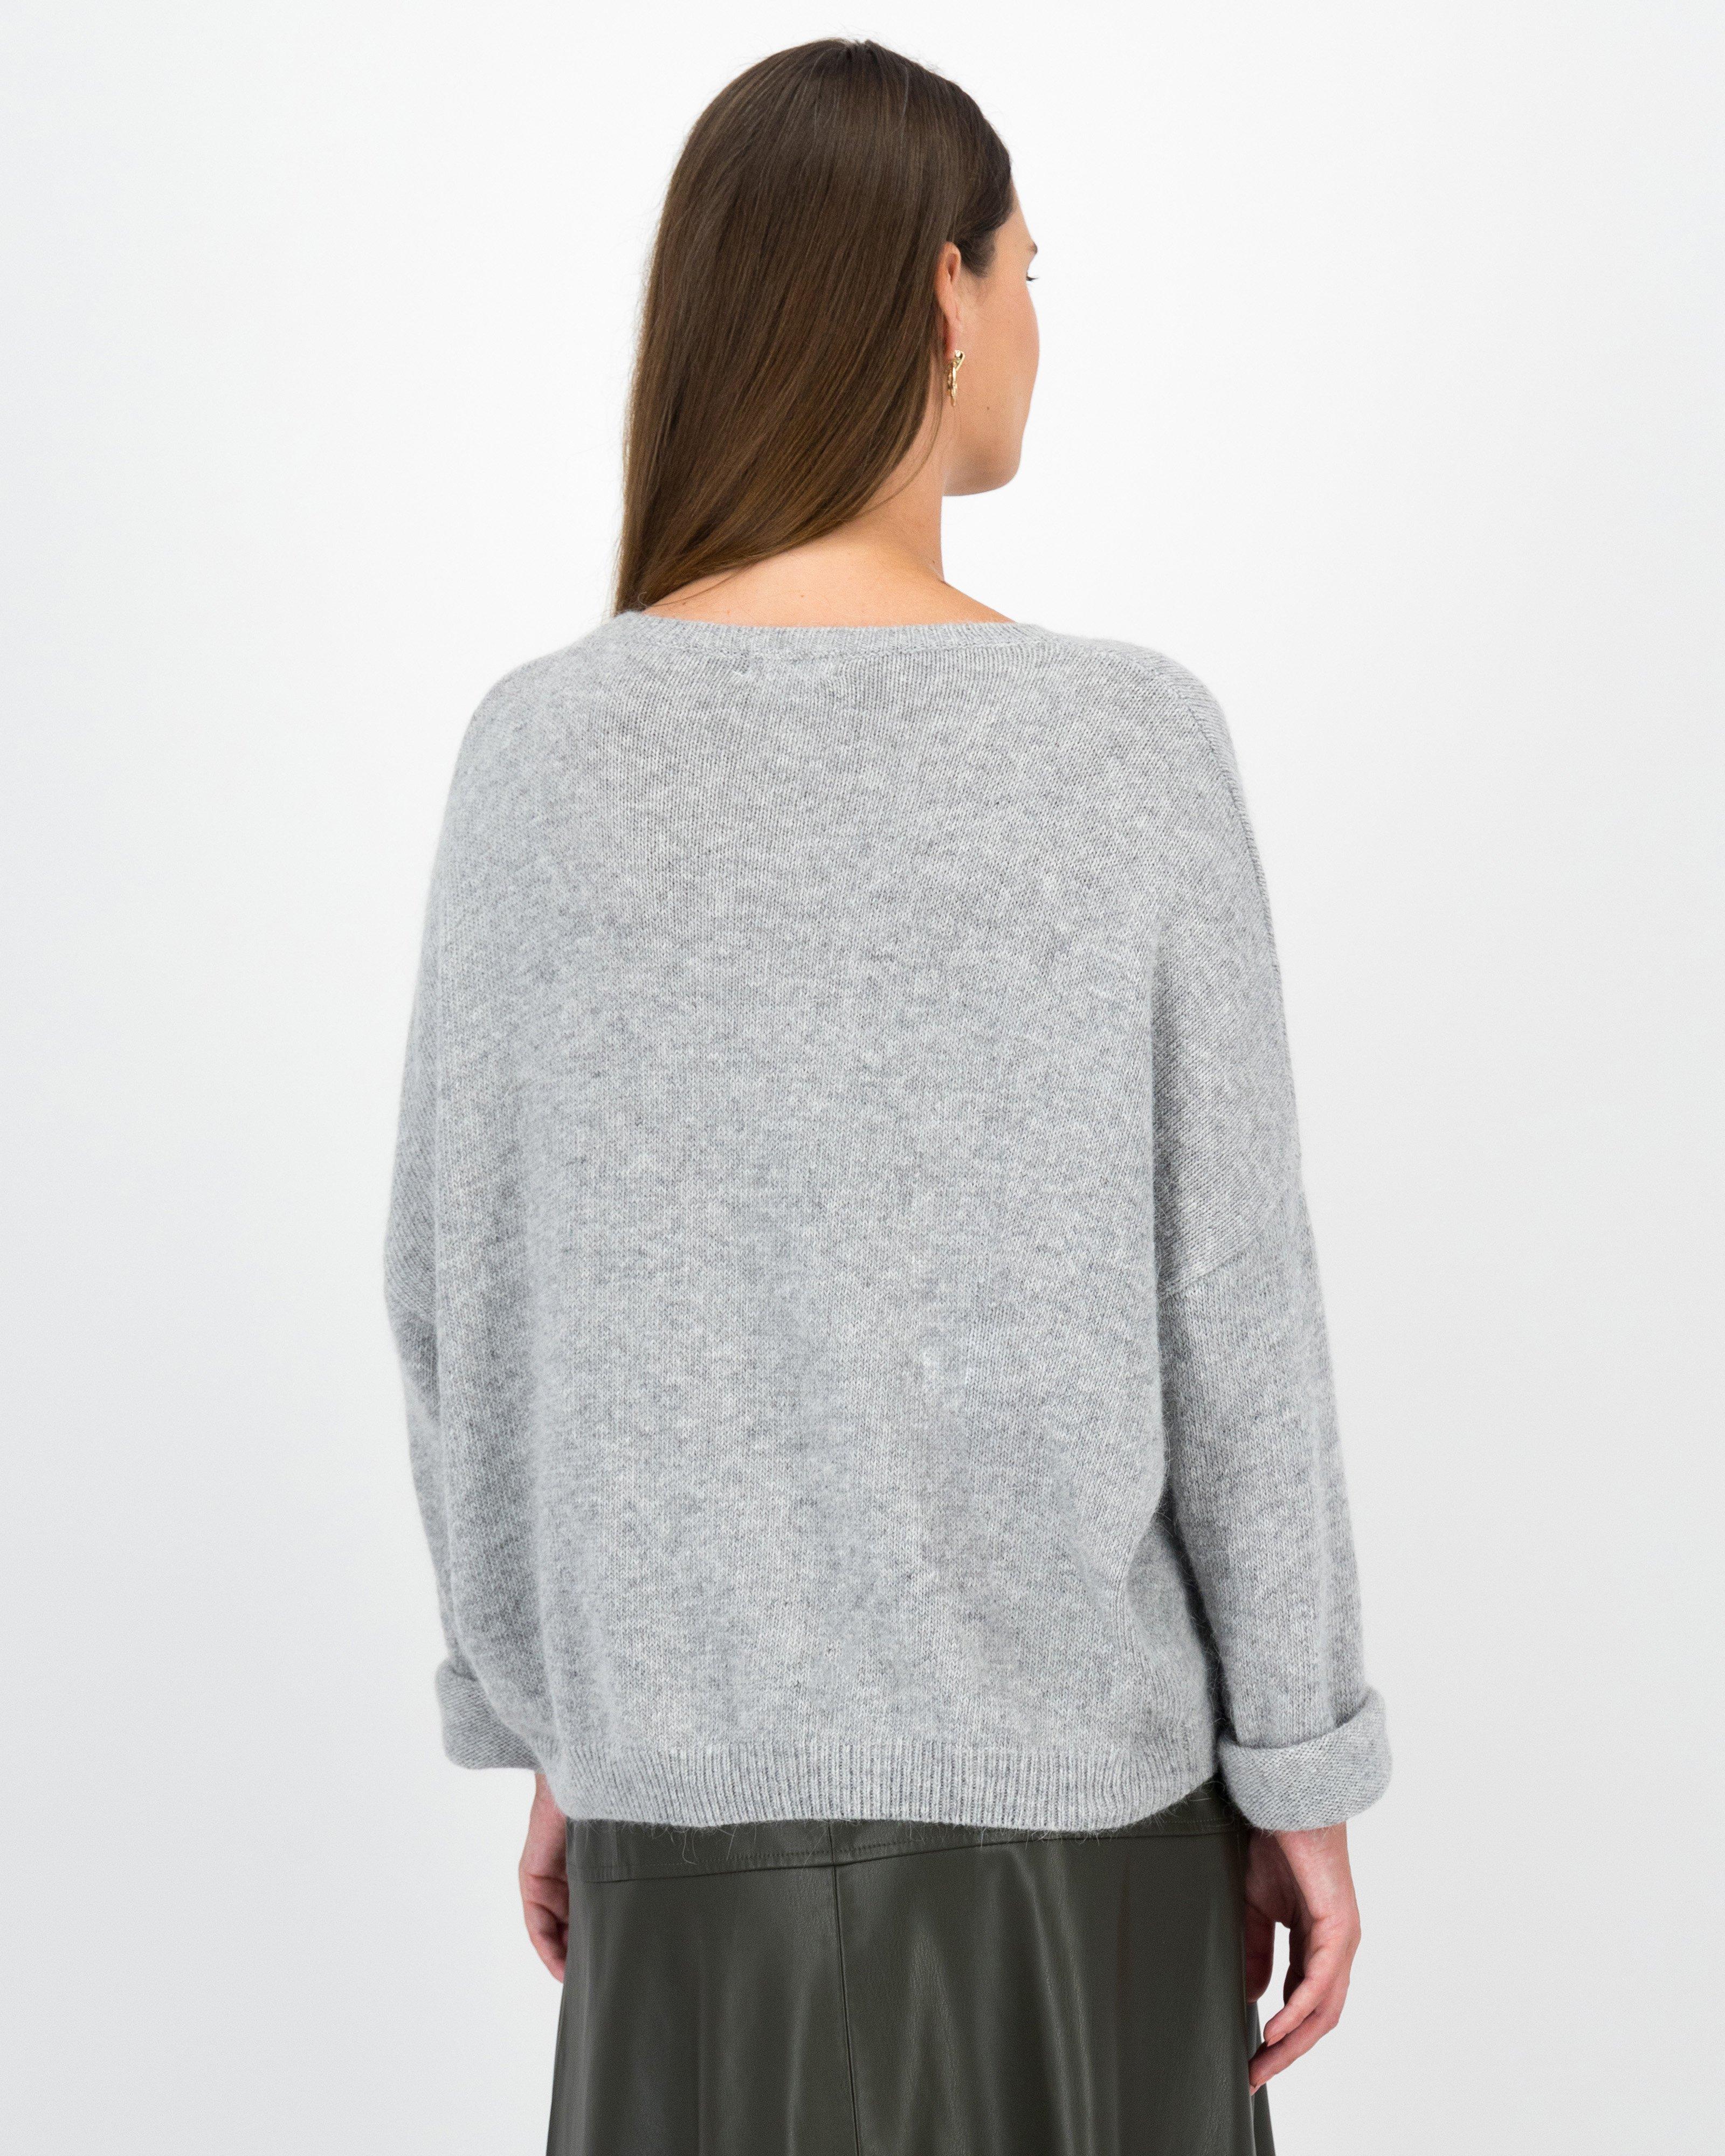 Carri Relaxed Knitwear Popover -  Light Grey